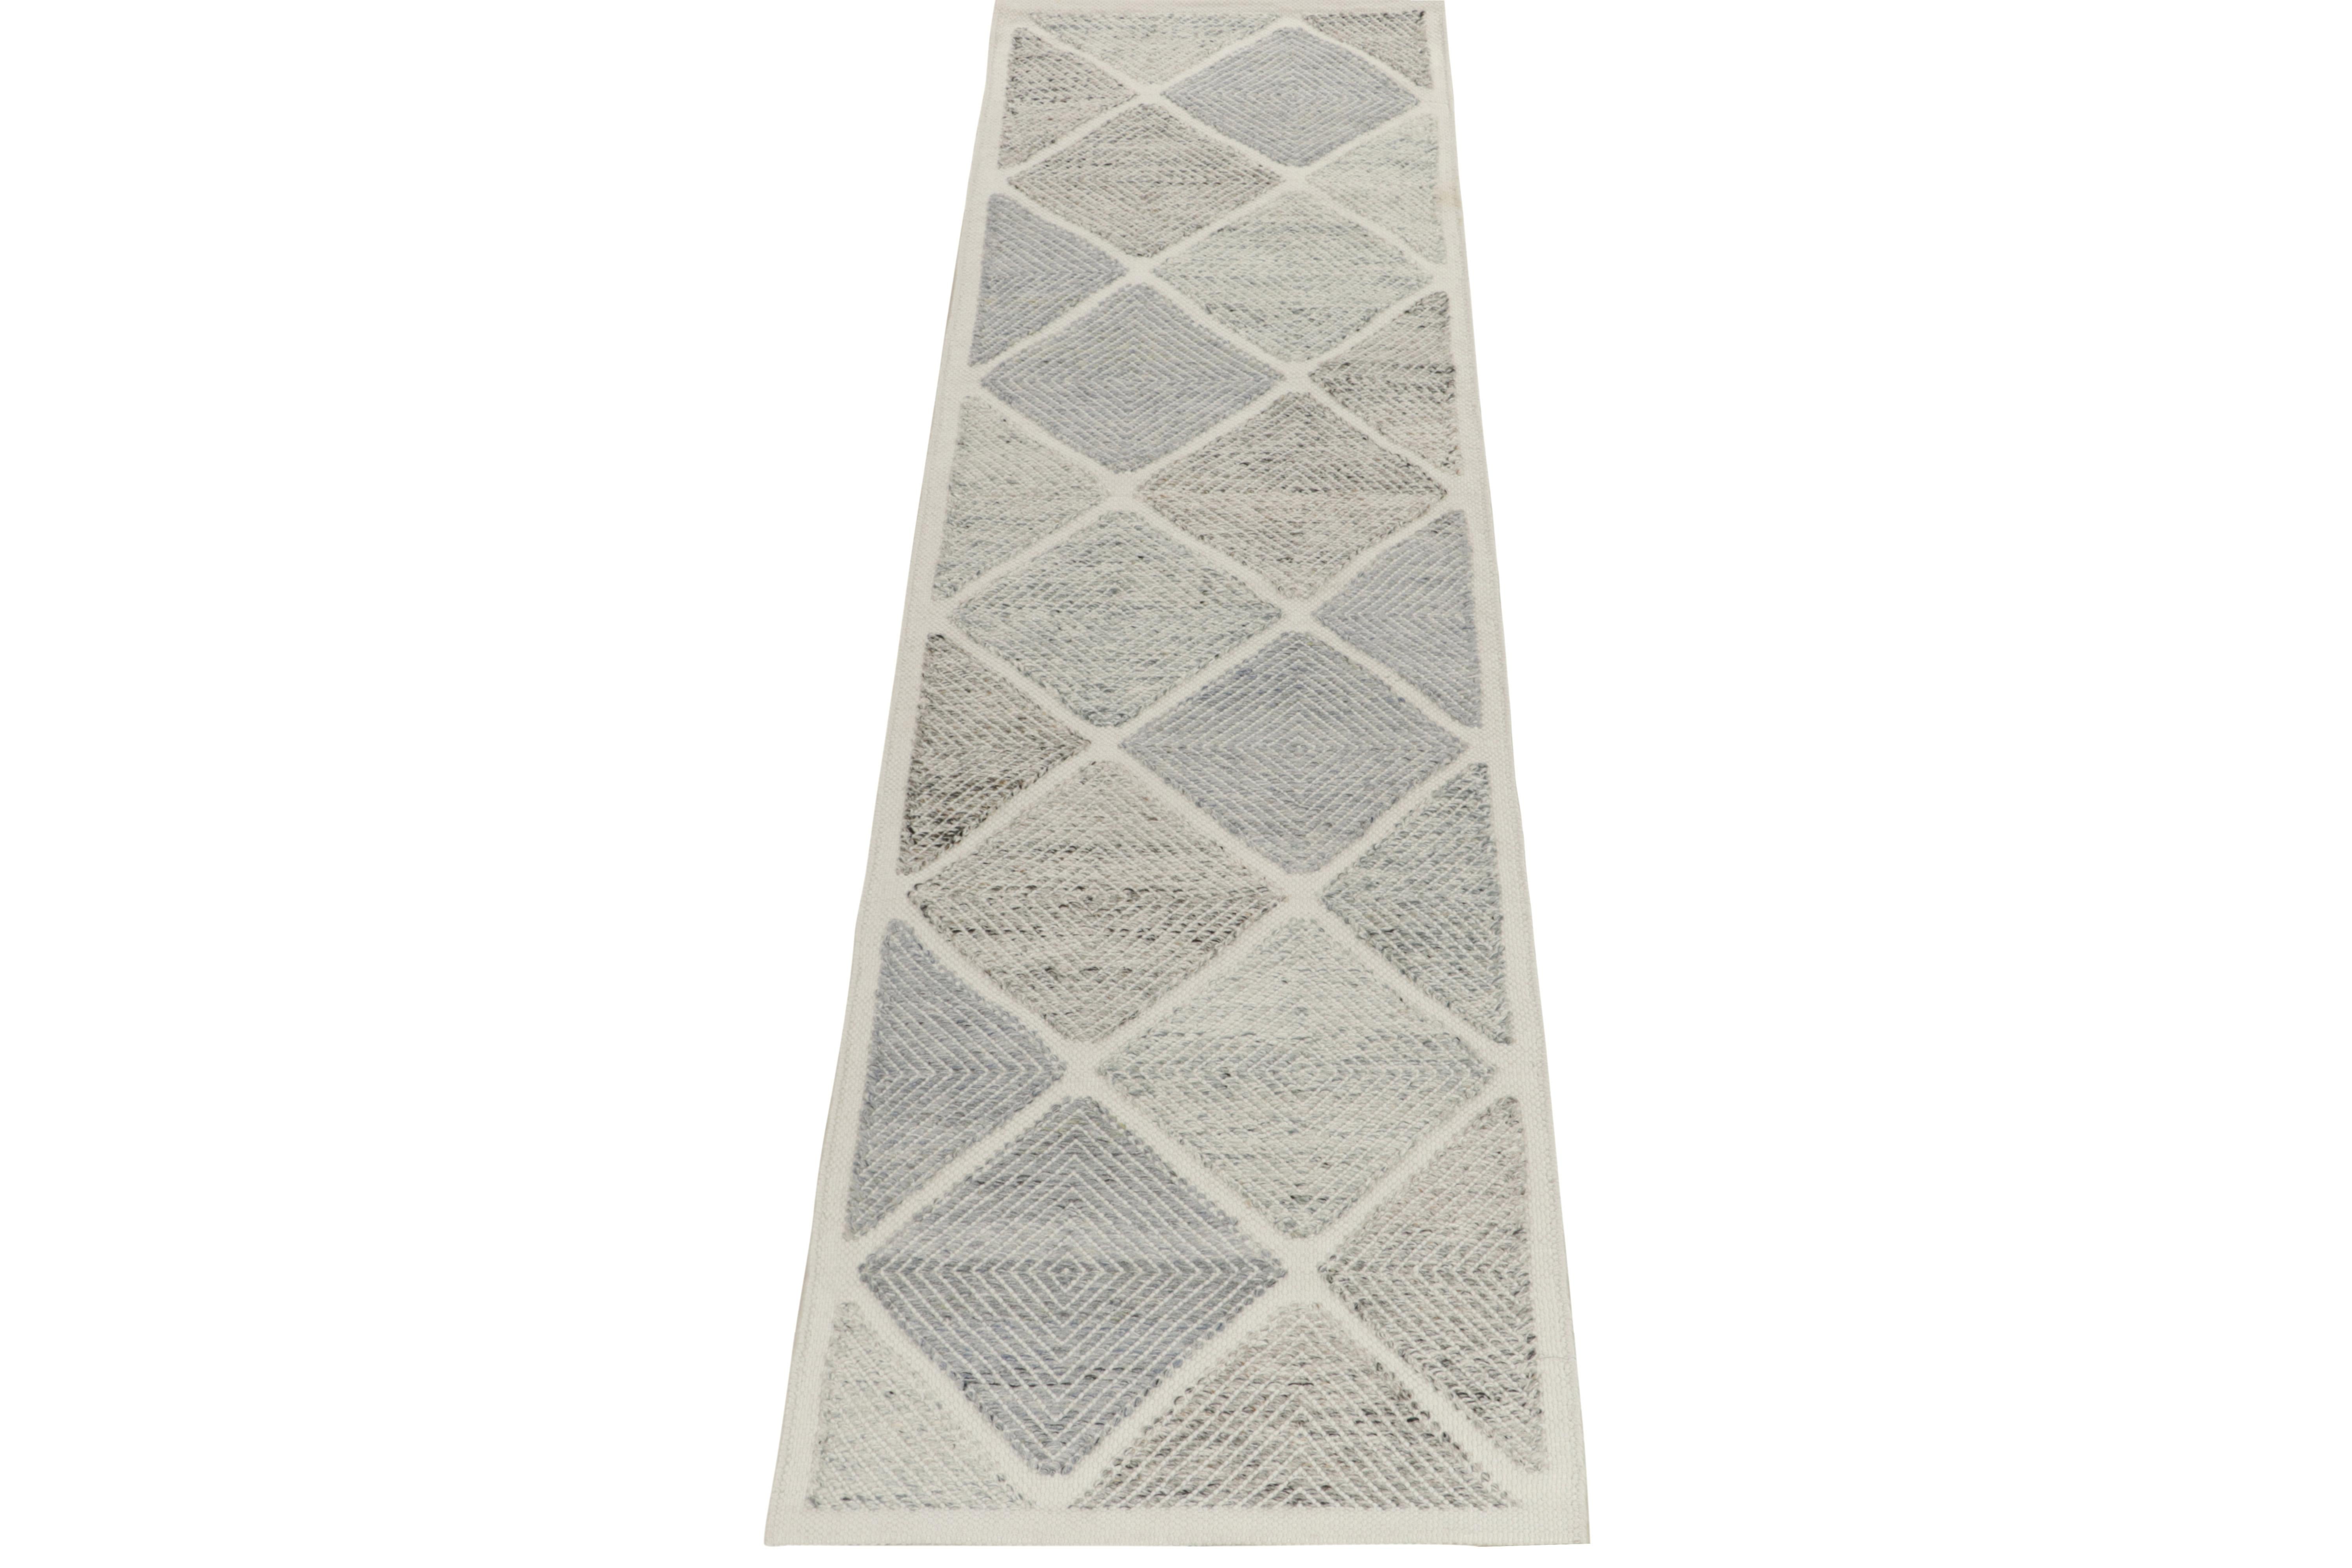 Rug & Kilim presents this exquisite 3x10 Scandinavian kilim from the Morocco line of the titular, award-winning flat weave texture. The handwoven runner flows in an all over diamond pattern in a delightful montage of stone gray, blue & white. The